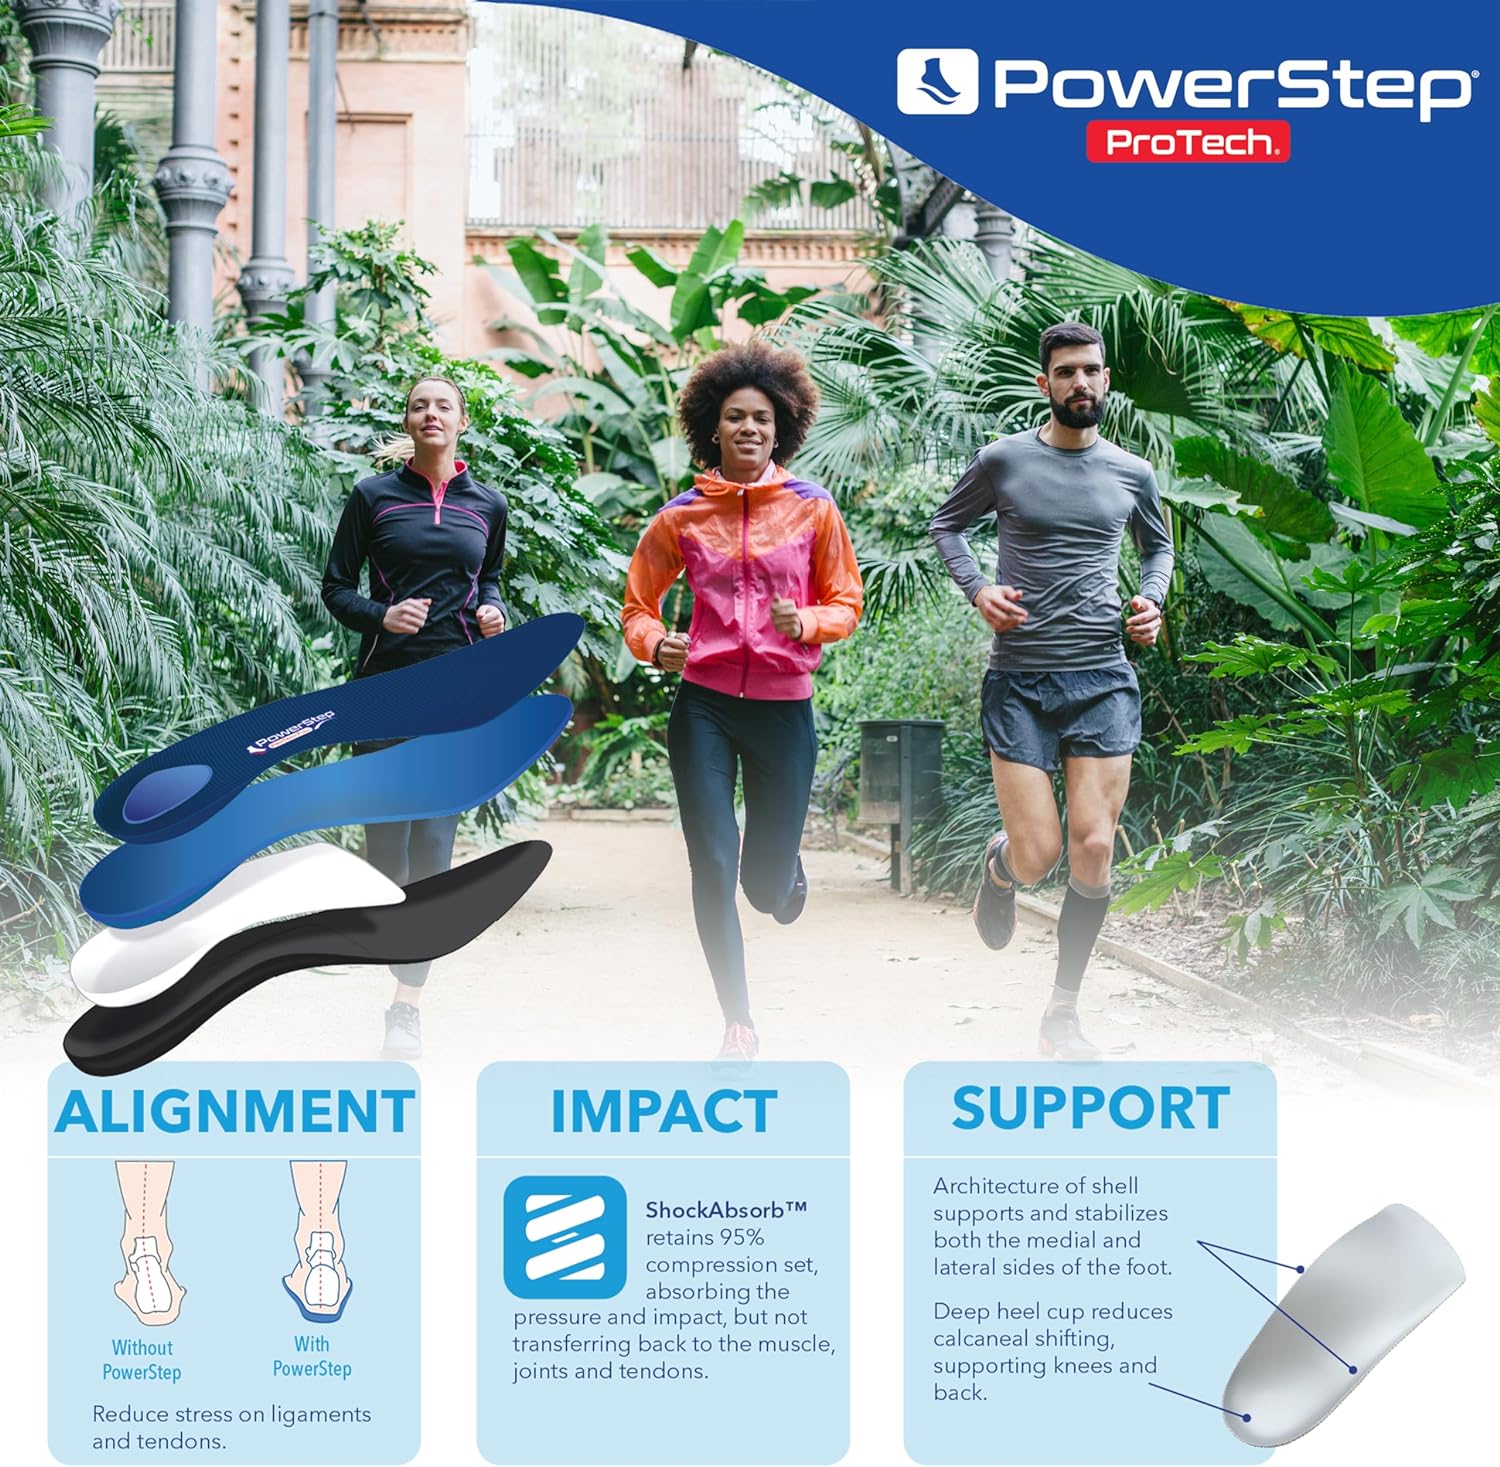 Powerstep ProTech Full Length High Orthotic Insoles - Medical Grade Pain Relief Orthotic Inserts with High Arch Support - Maximum Cushioning for Supination + Plantar Fasciitis (M 8-8.5 W 10-10.5)